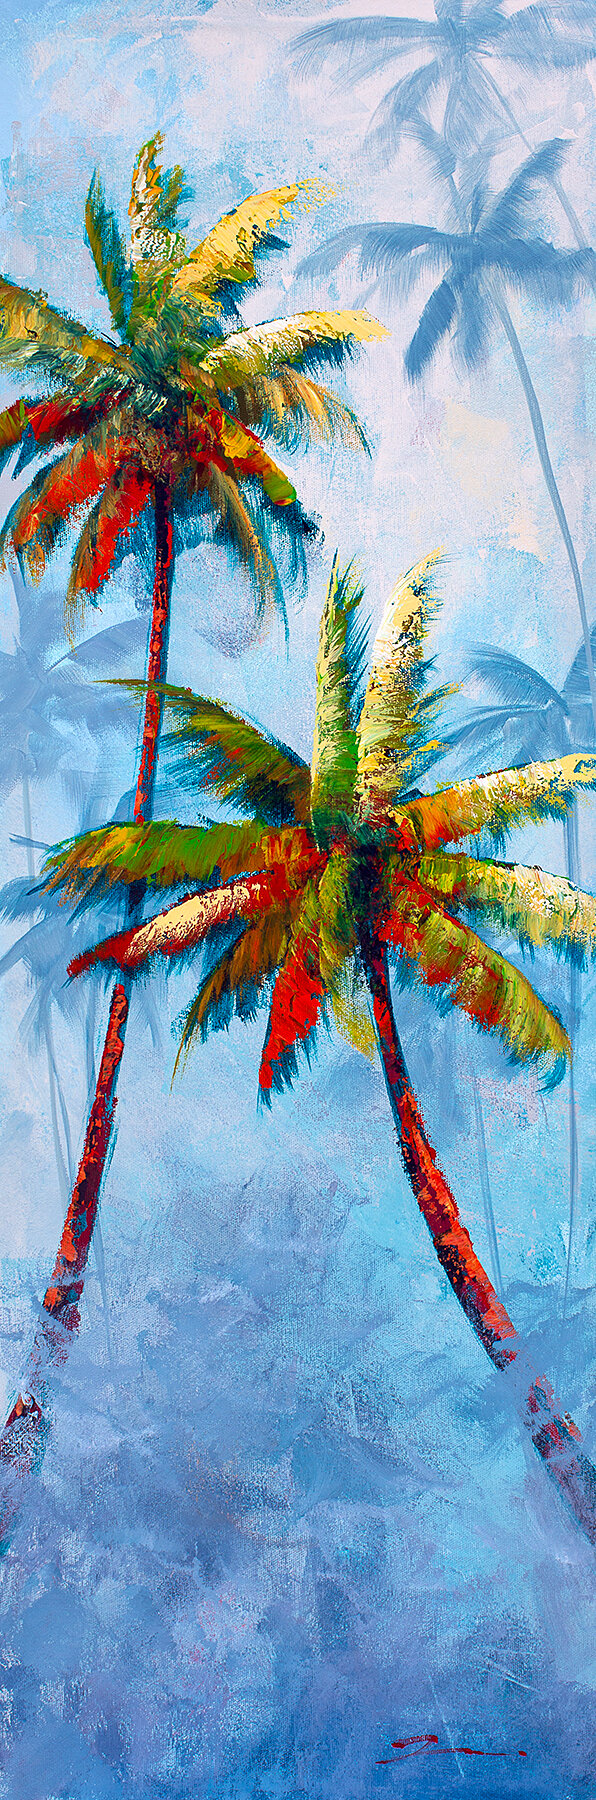 Salty Breeze 12x36Salty Breeze is an original acrylic painting by Rosa Chavez on a gallery wrapped canvas measuring 12" x 36" x 1.5". Tropical Paradis